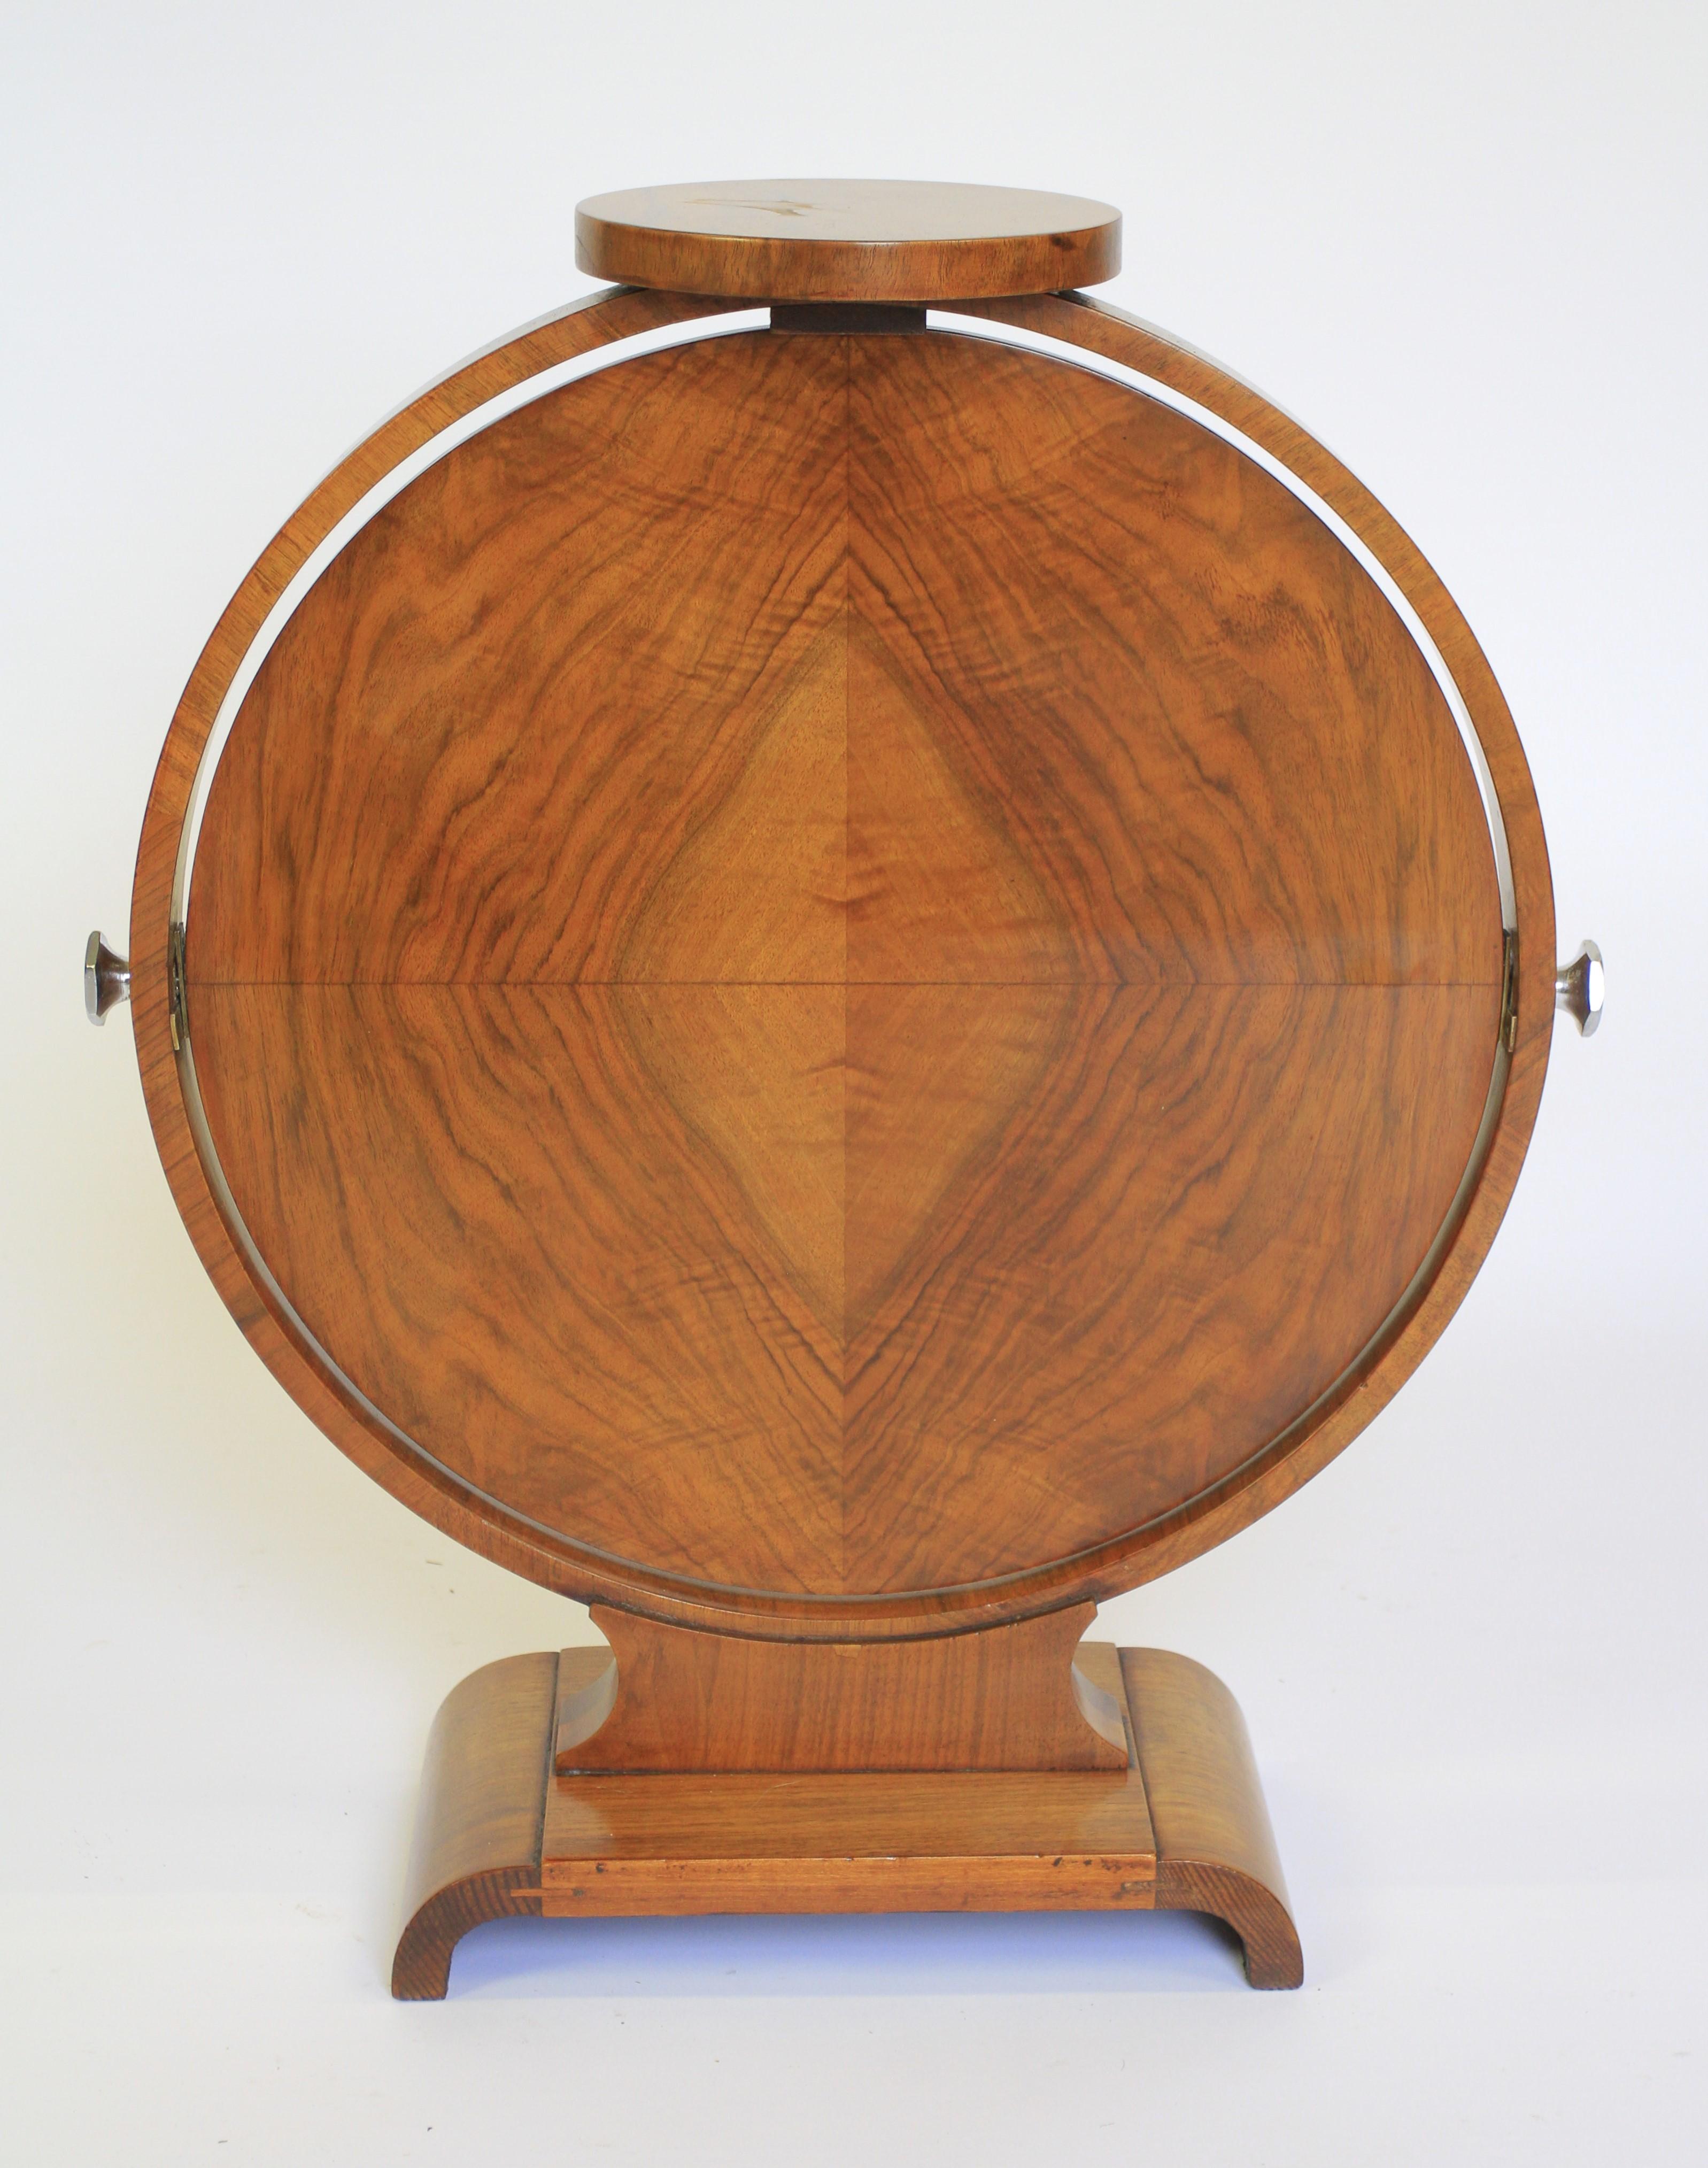 Art Deco Walnut Folding Lamp/Coffee Table circa 1930s
Hoop Shaped Frame , with
Small Walnut Circular top, 18cm diameter
Folding Walnut circular top 46cm diameter. height 35.5cm.
 with 
Chrome Plated Pinch Knobs each side, 
Arch Shaped Platform